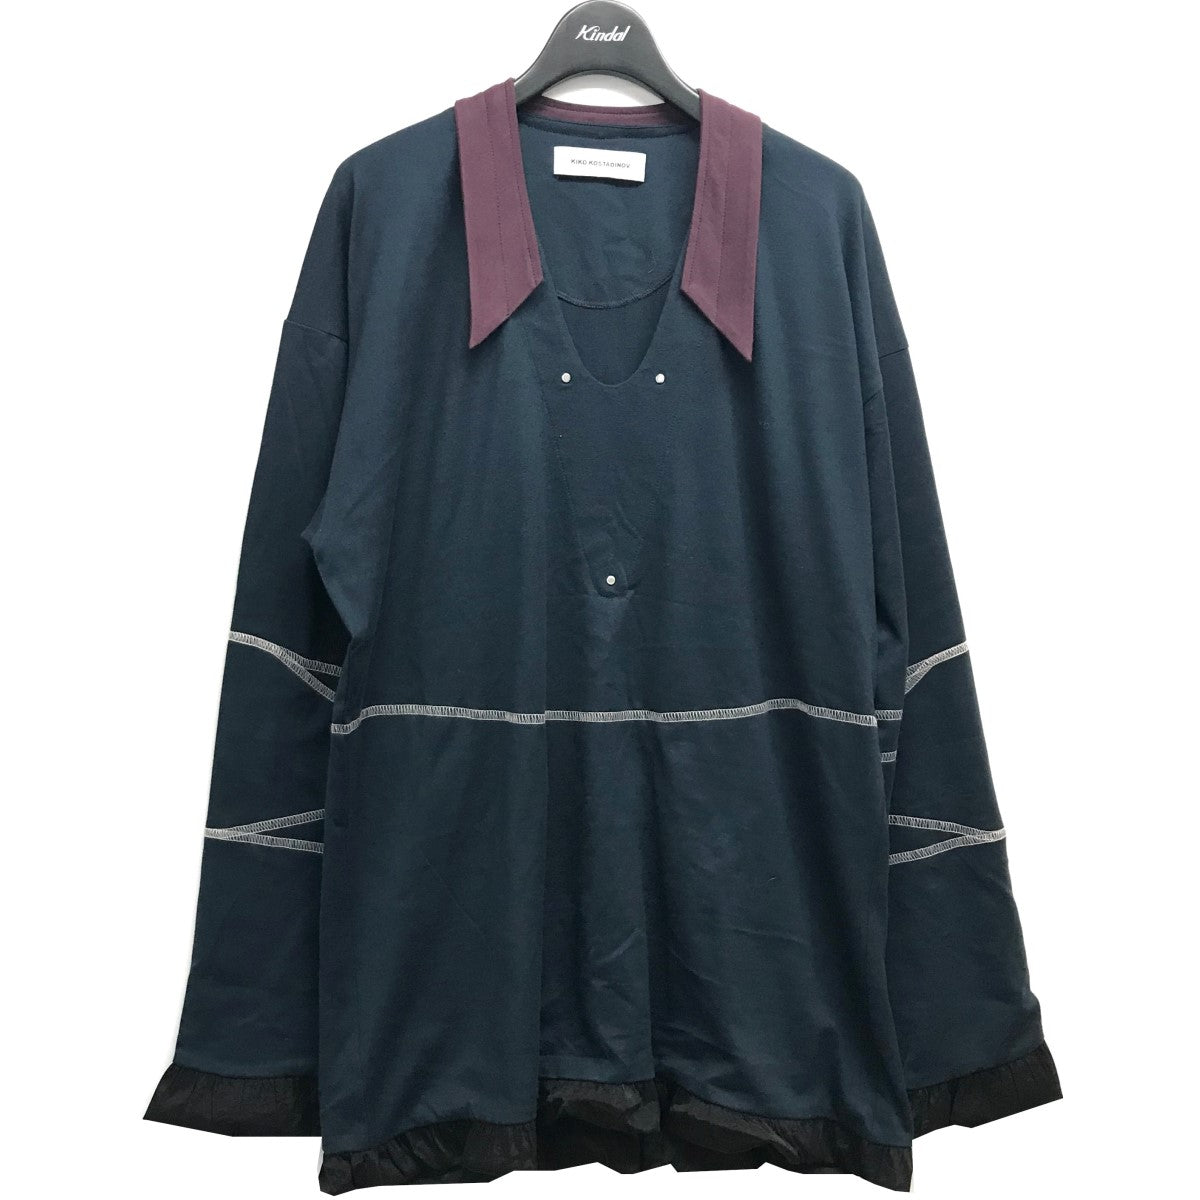 21SS「norman armour jersey top」アーマージャージトップス